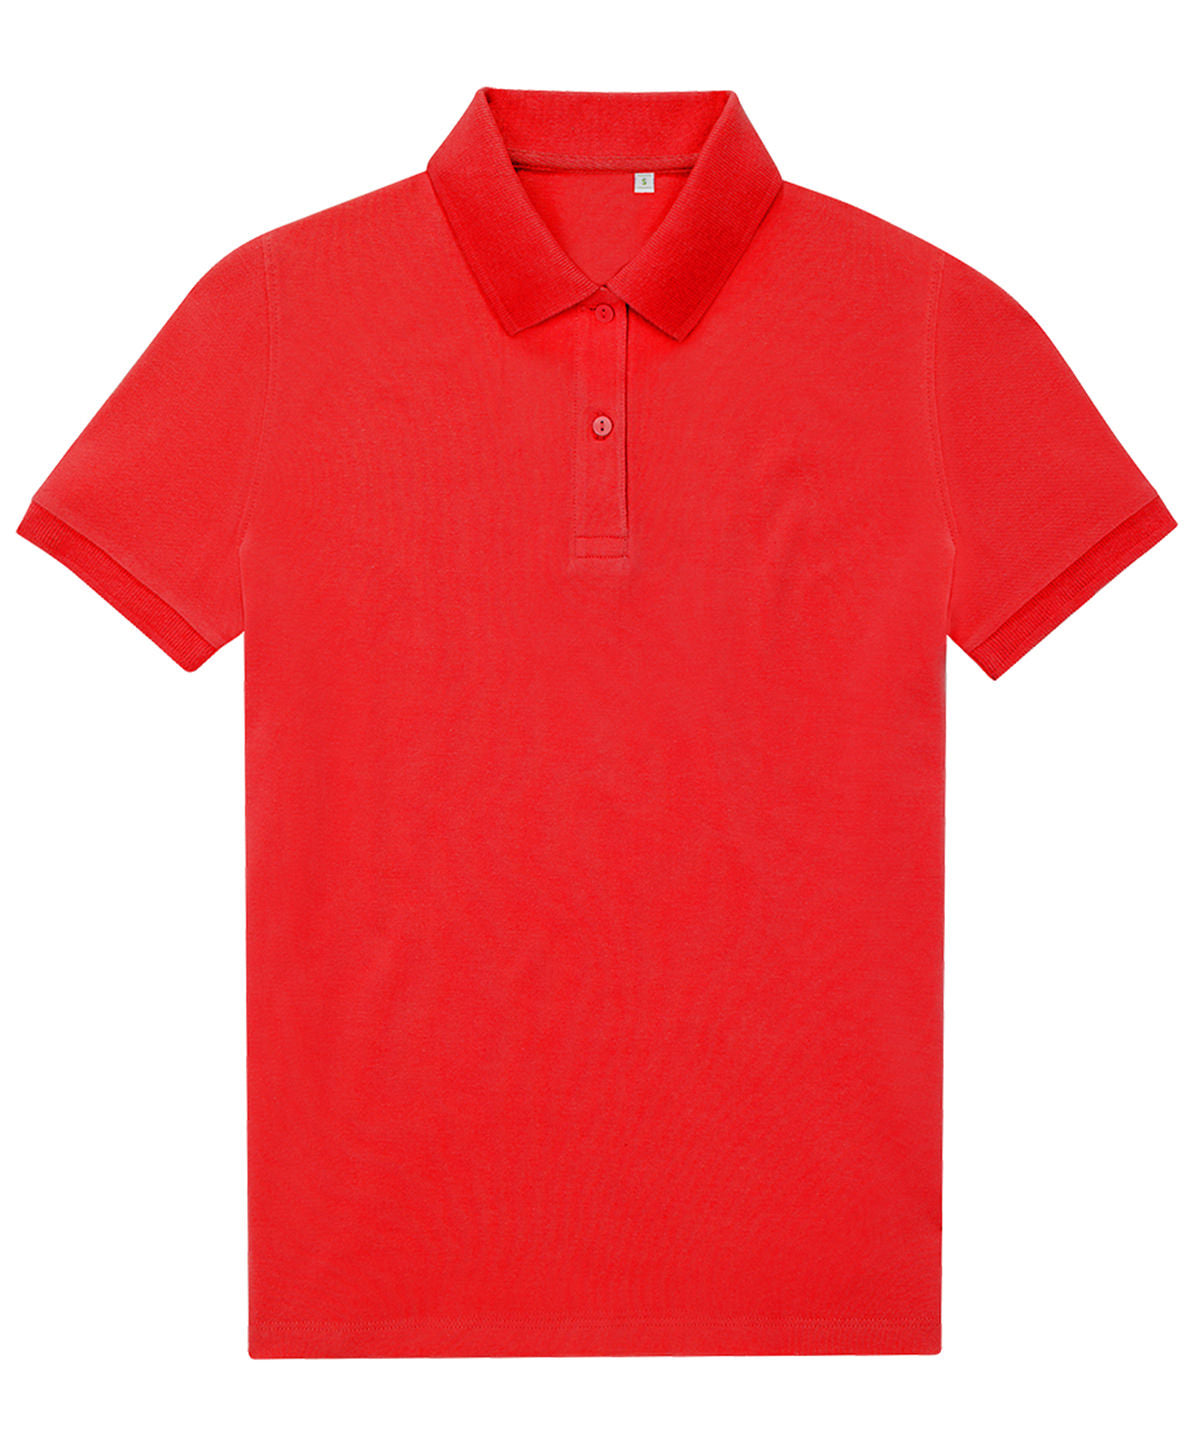 B&C Collection My Eco Polo 65/35 Women Red